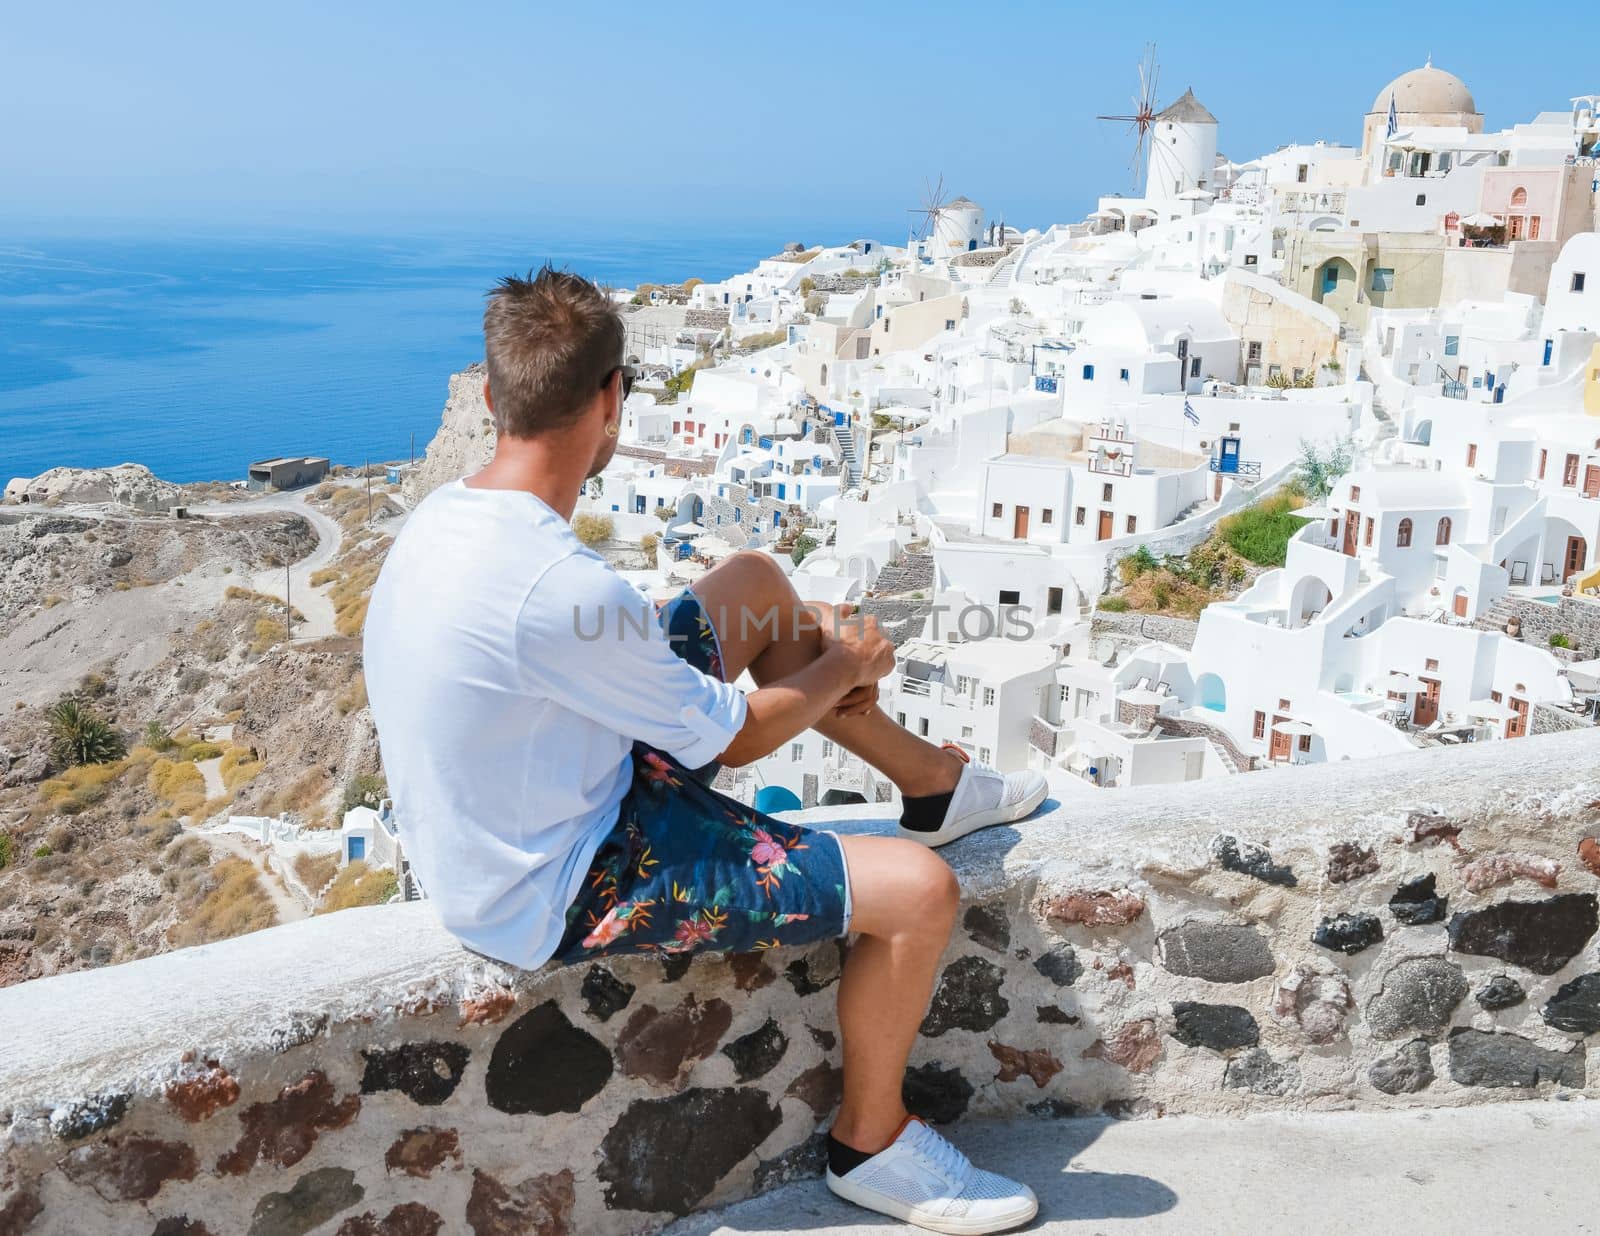 Young men at Oia Santorini Greece on a sunny day during summer with whitewashed homes and churches by fokkebok